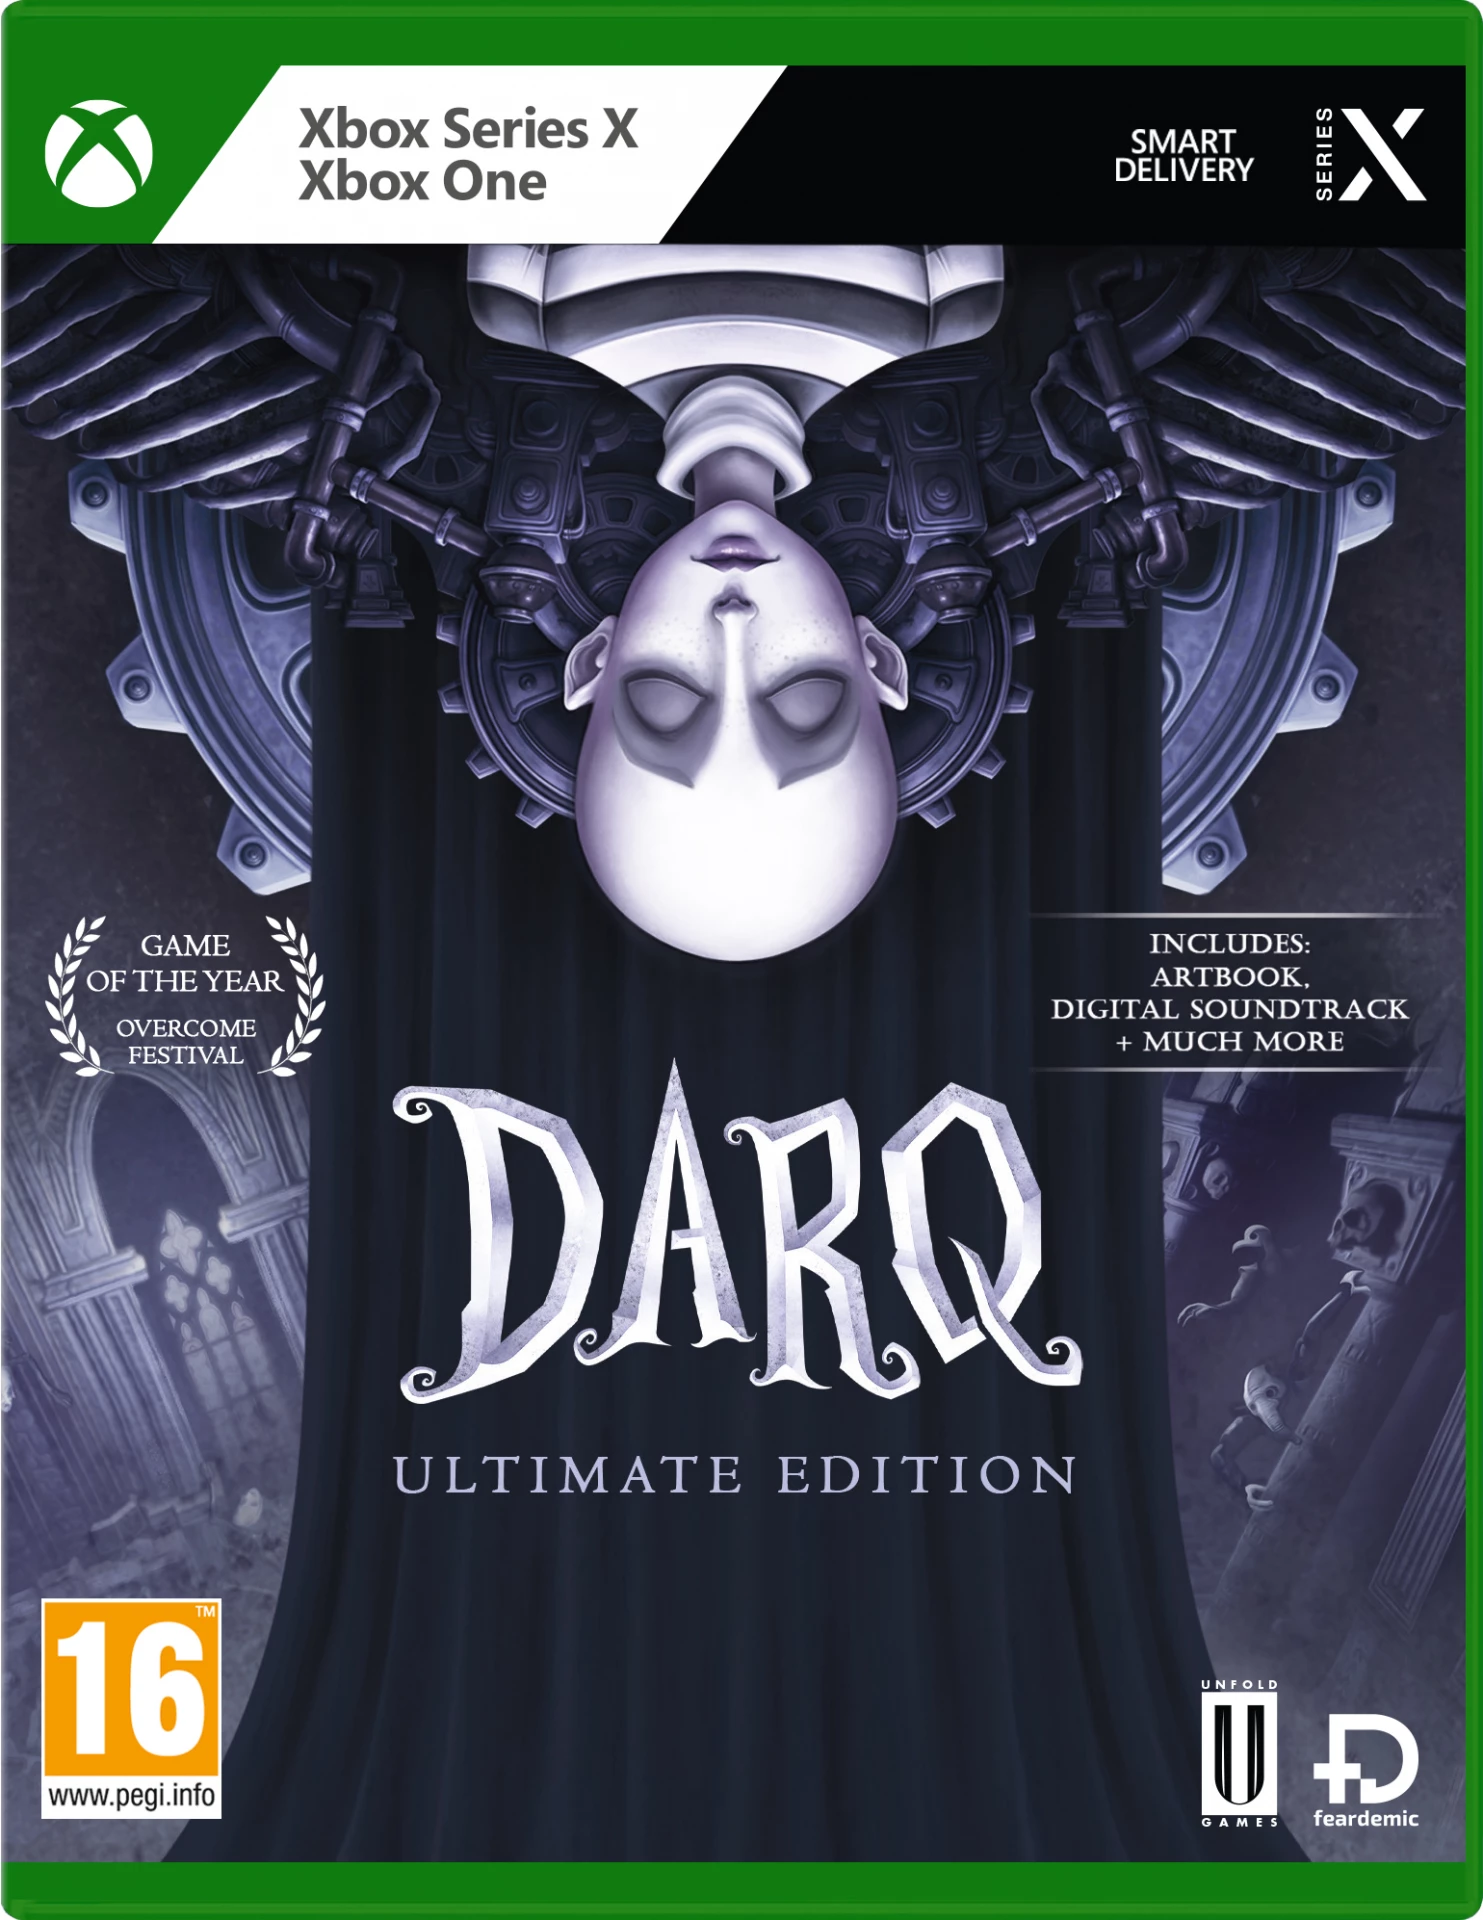 DARQ - Ultimate Edition (Xbox Series X), Unfold Games, Feardemic